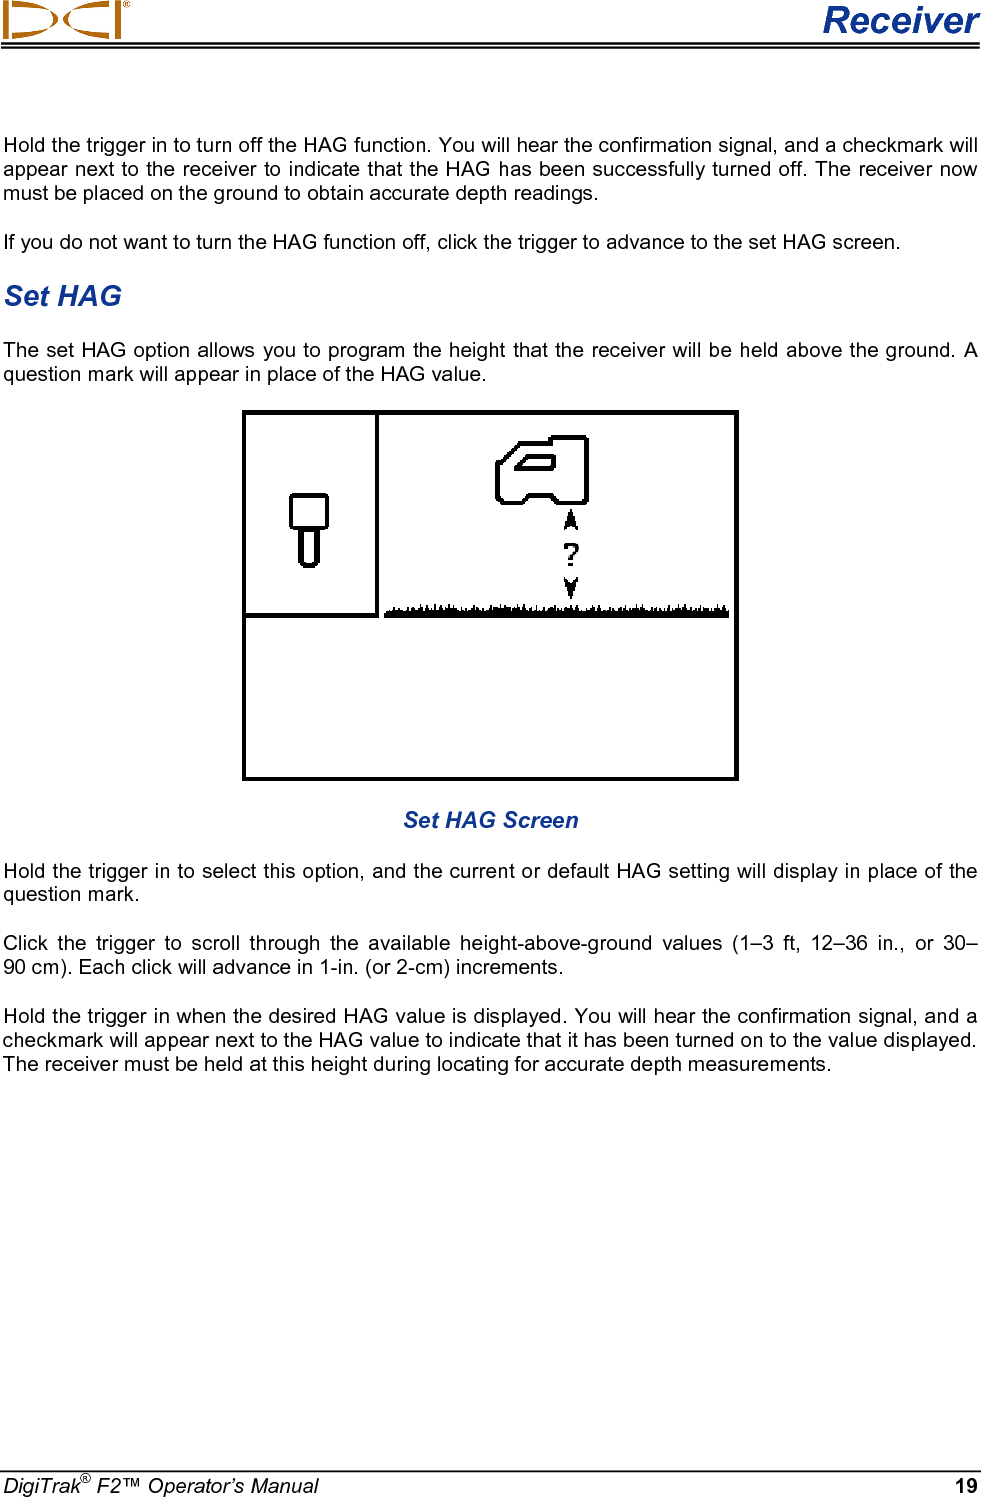  Receiver DigiTrak® F2™ Operator’s Manual 19 Hold the trigger in to turn off the HAG function. You will hear the confirmation signal, and a checkmark will appear next to the receiver to indicate that the HAG has been successfully turned off. The receiver now must be placed on the ground to obtain accurate depth readings.  If you do not want to turn the HAG function off, click the trigger to advance to the set HAG screen. Set HAG The set HAG option allows you to program the height that the receiver will be held above the ground. A question mark will appear in place of the HAG value.  Set HAG Screen Hold the trigger in to select this option, and the current or default HAG setting will display in place of the question mark.  Click the trigger to scroll through the available height-above-ground values (1–3 ft, 12–36 in., or  30–90 cm). Each click will advance in 1-in. (or 2-cm) increments.  Hold the trigger in when the desired HAG value is displayed. You will hear the confirmation signal, and a checkmark will appear next to the HAG value to indicate that it has been turned on to the value displayed. The receiver must be held at this height during locating for accurate depth measurements.  